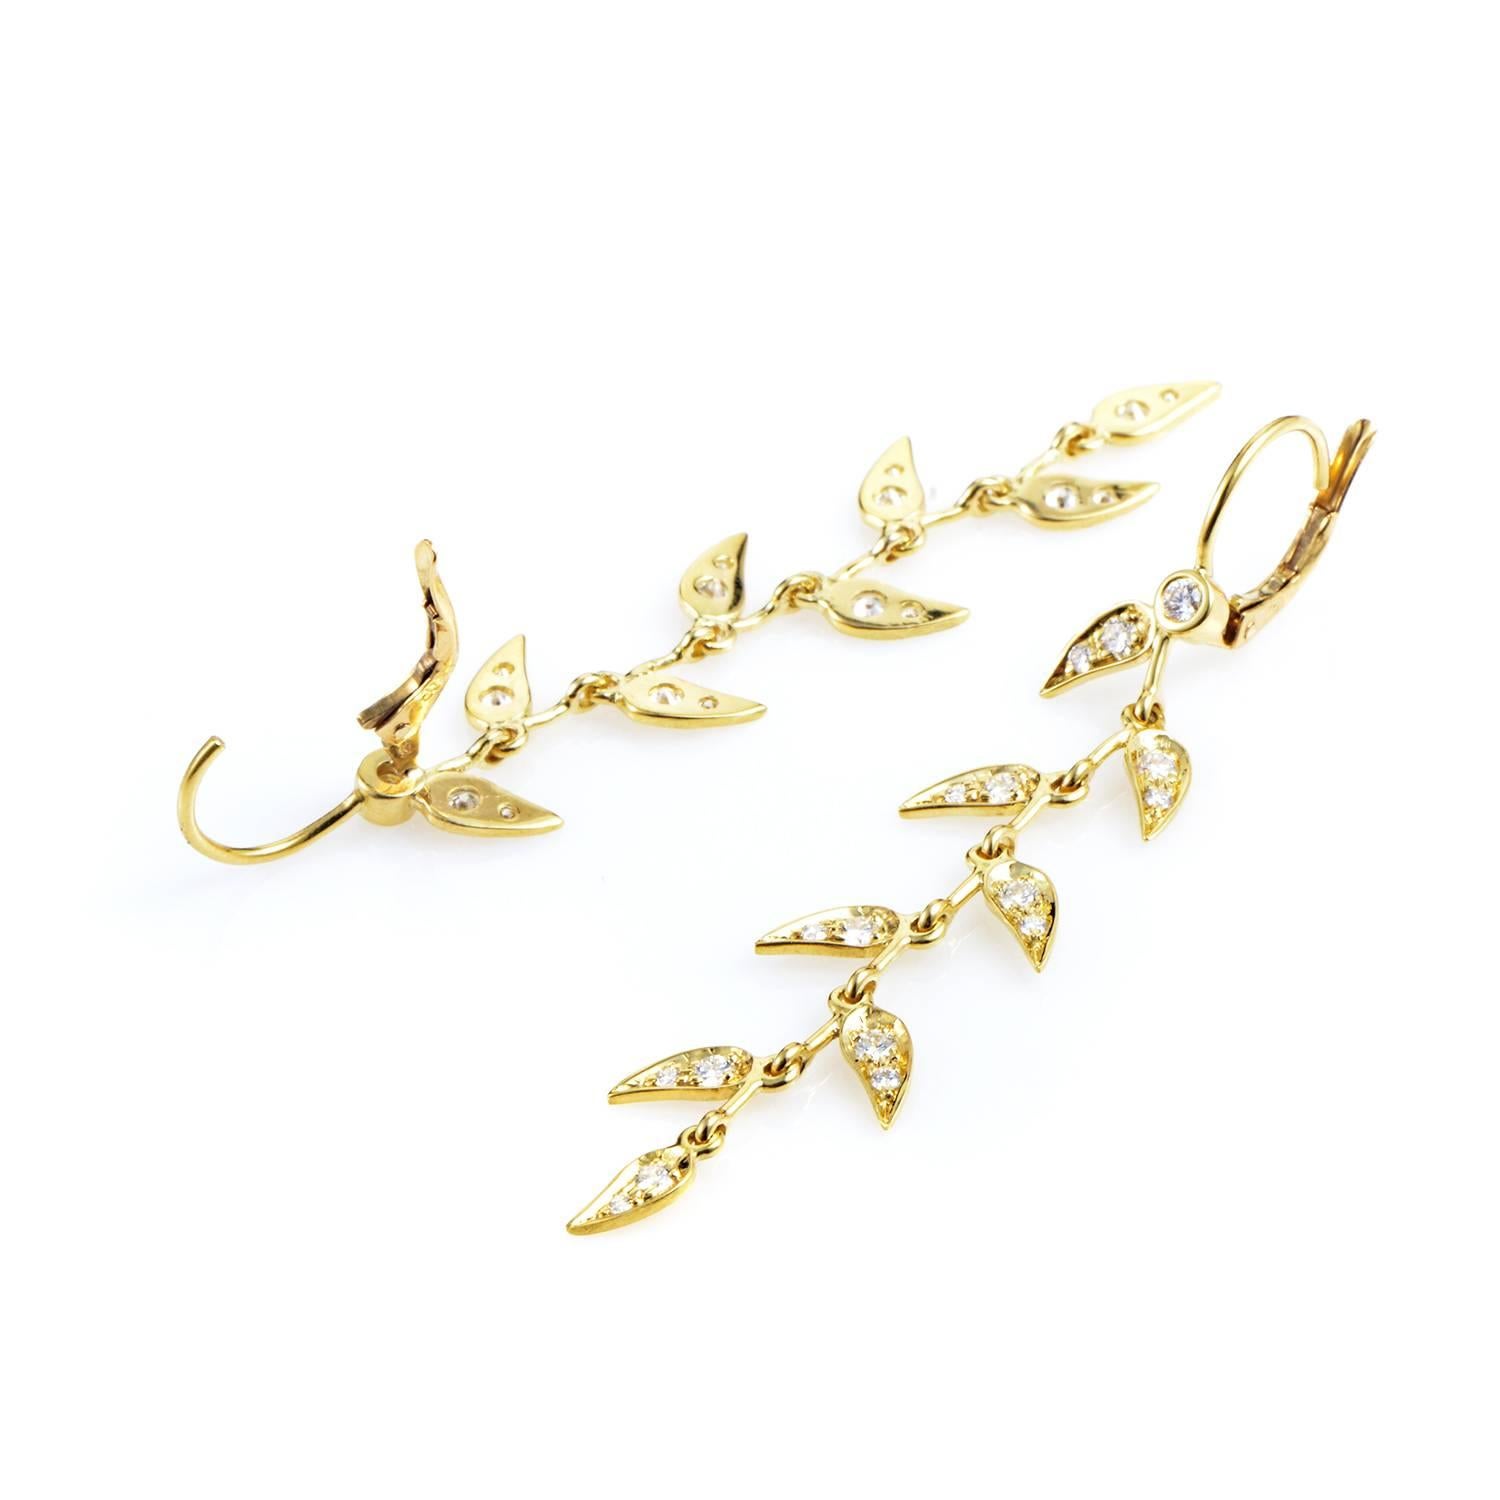 Inspired by the pure beauty of nature and given a touch of classic luxury by the G-color diamonds of VS1 clarity weighing in total approximately 0.85ct, these graceful earrings from Penny Preville hang like 18K yellow gold vines of tender shape and